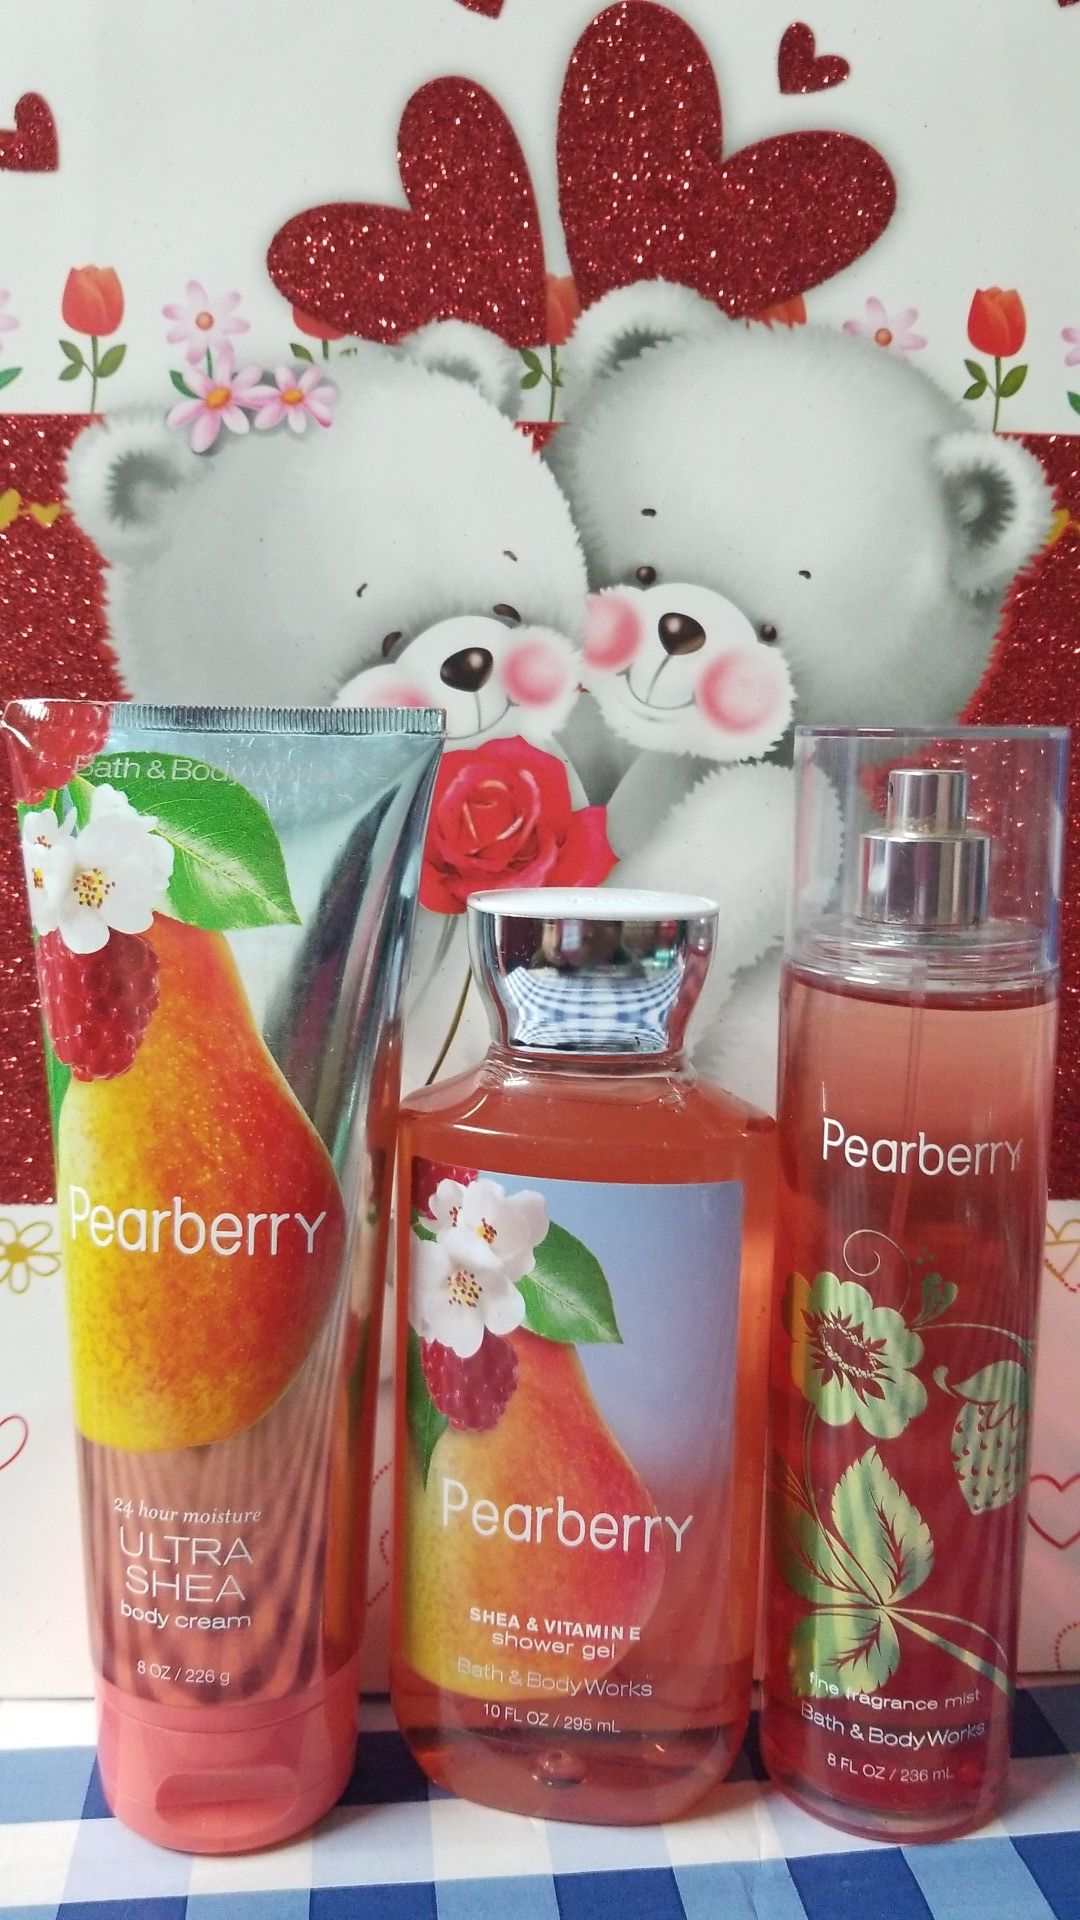 BATH AND BODY WORKS- PEARBERRY